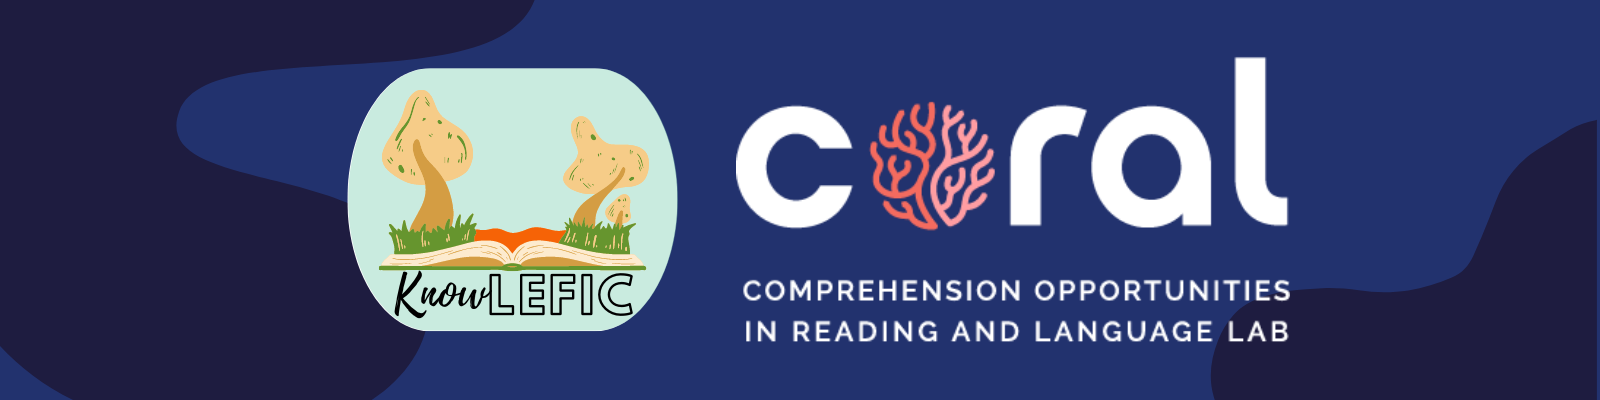 Knowledge, Learning, & Executive Function in Comprehension (KnowLEFIC)